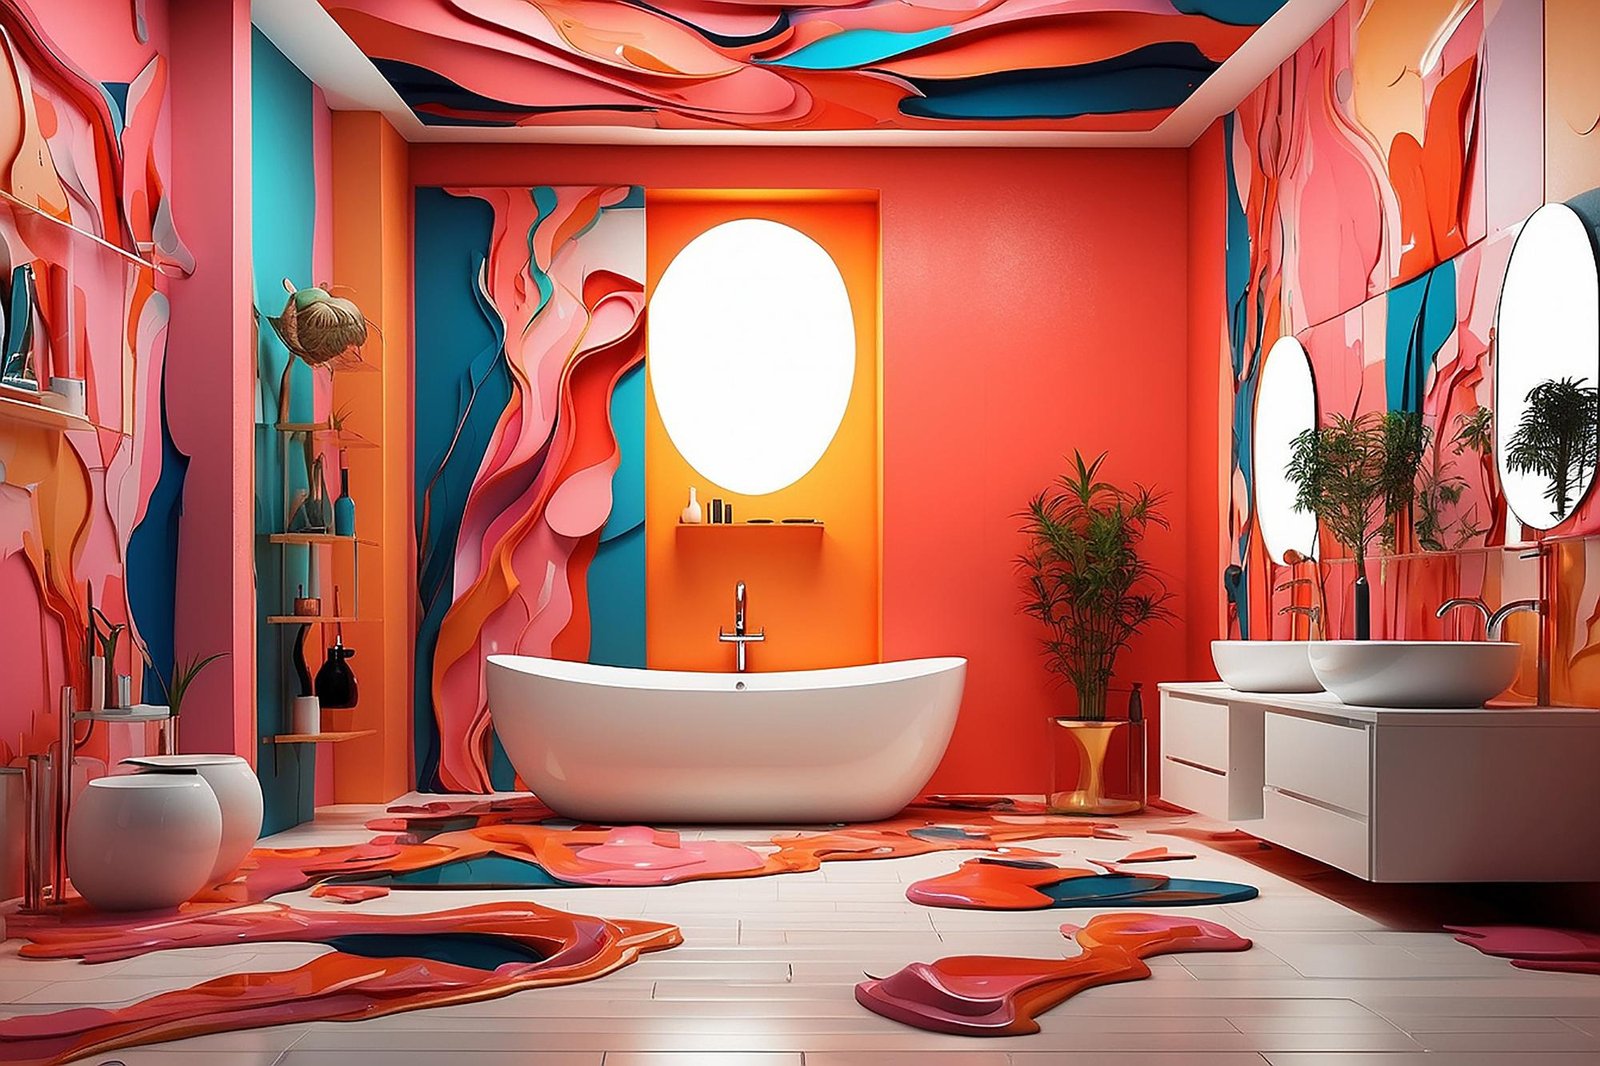 Very colorful and fun bathroom.